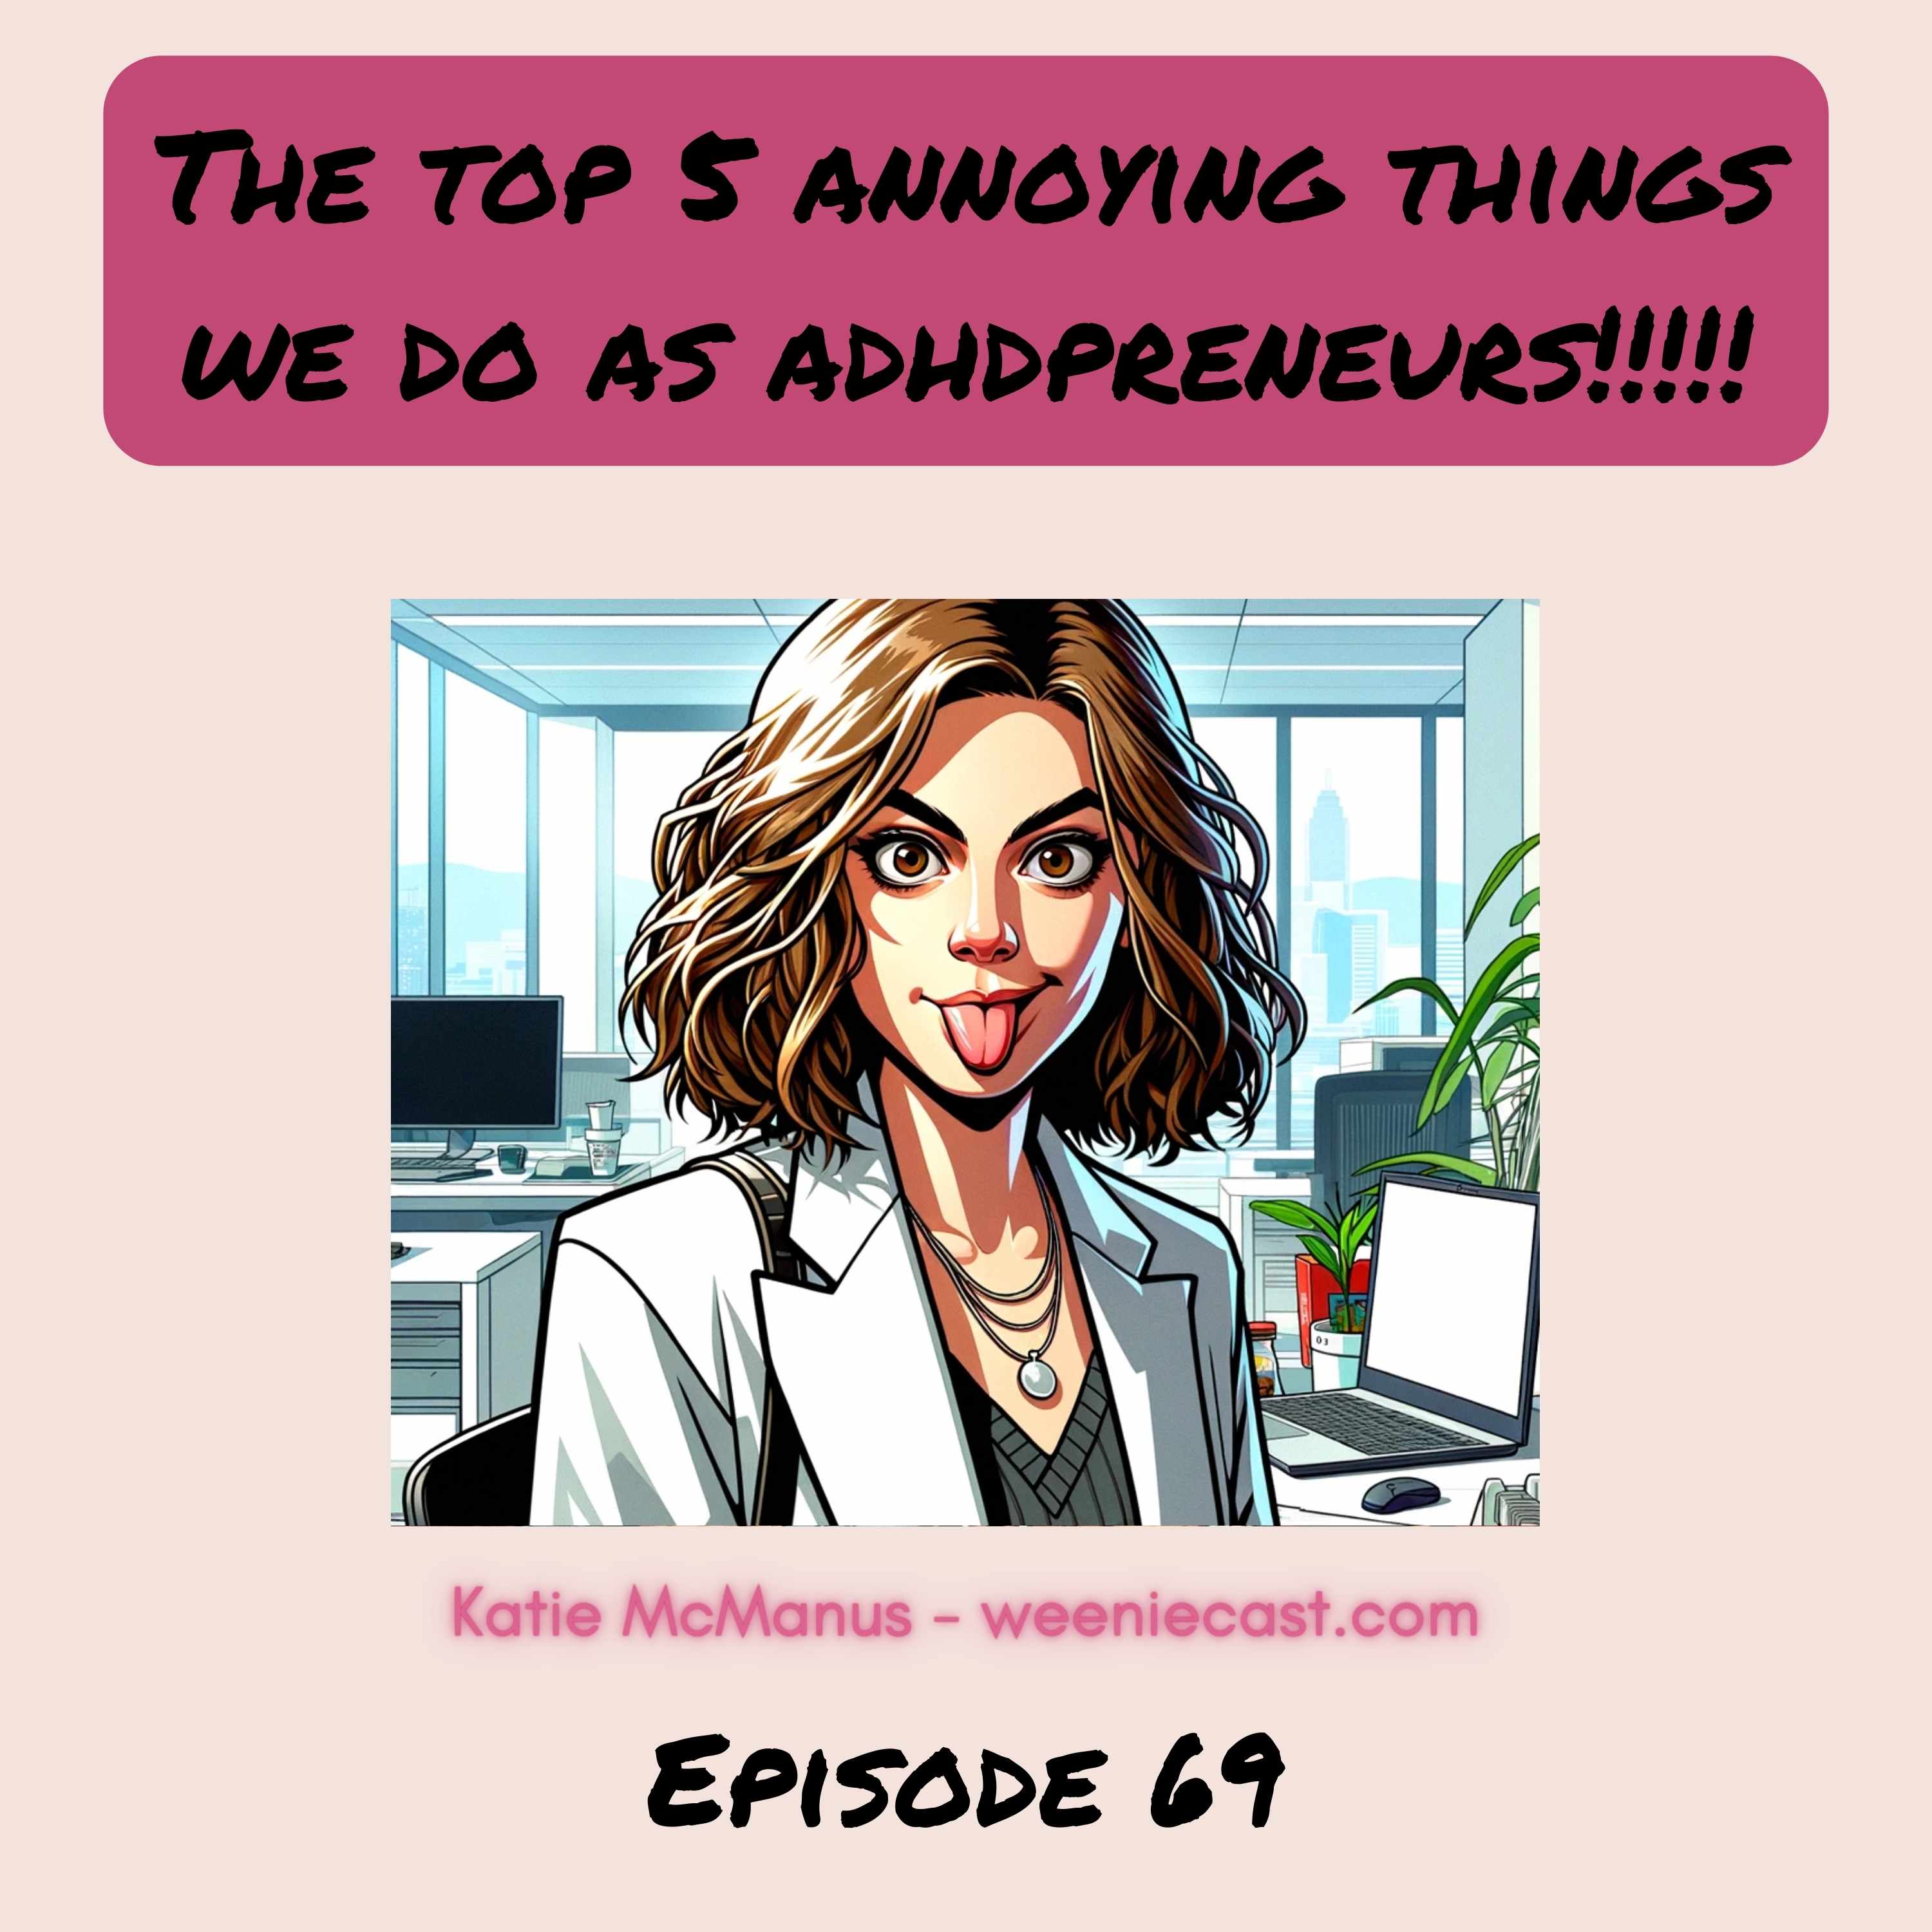 ADHD entrepreneurs have these 5 annoying traits. Let's celebrate them together!